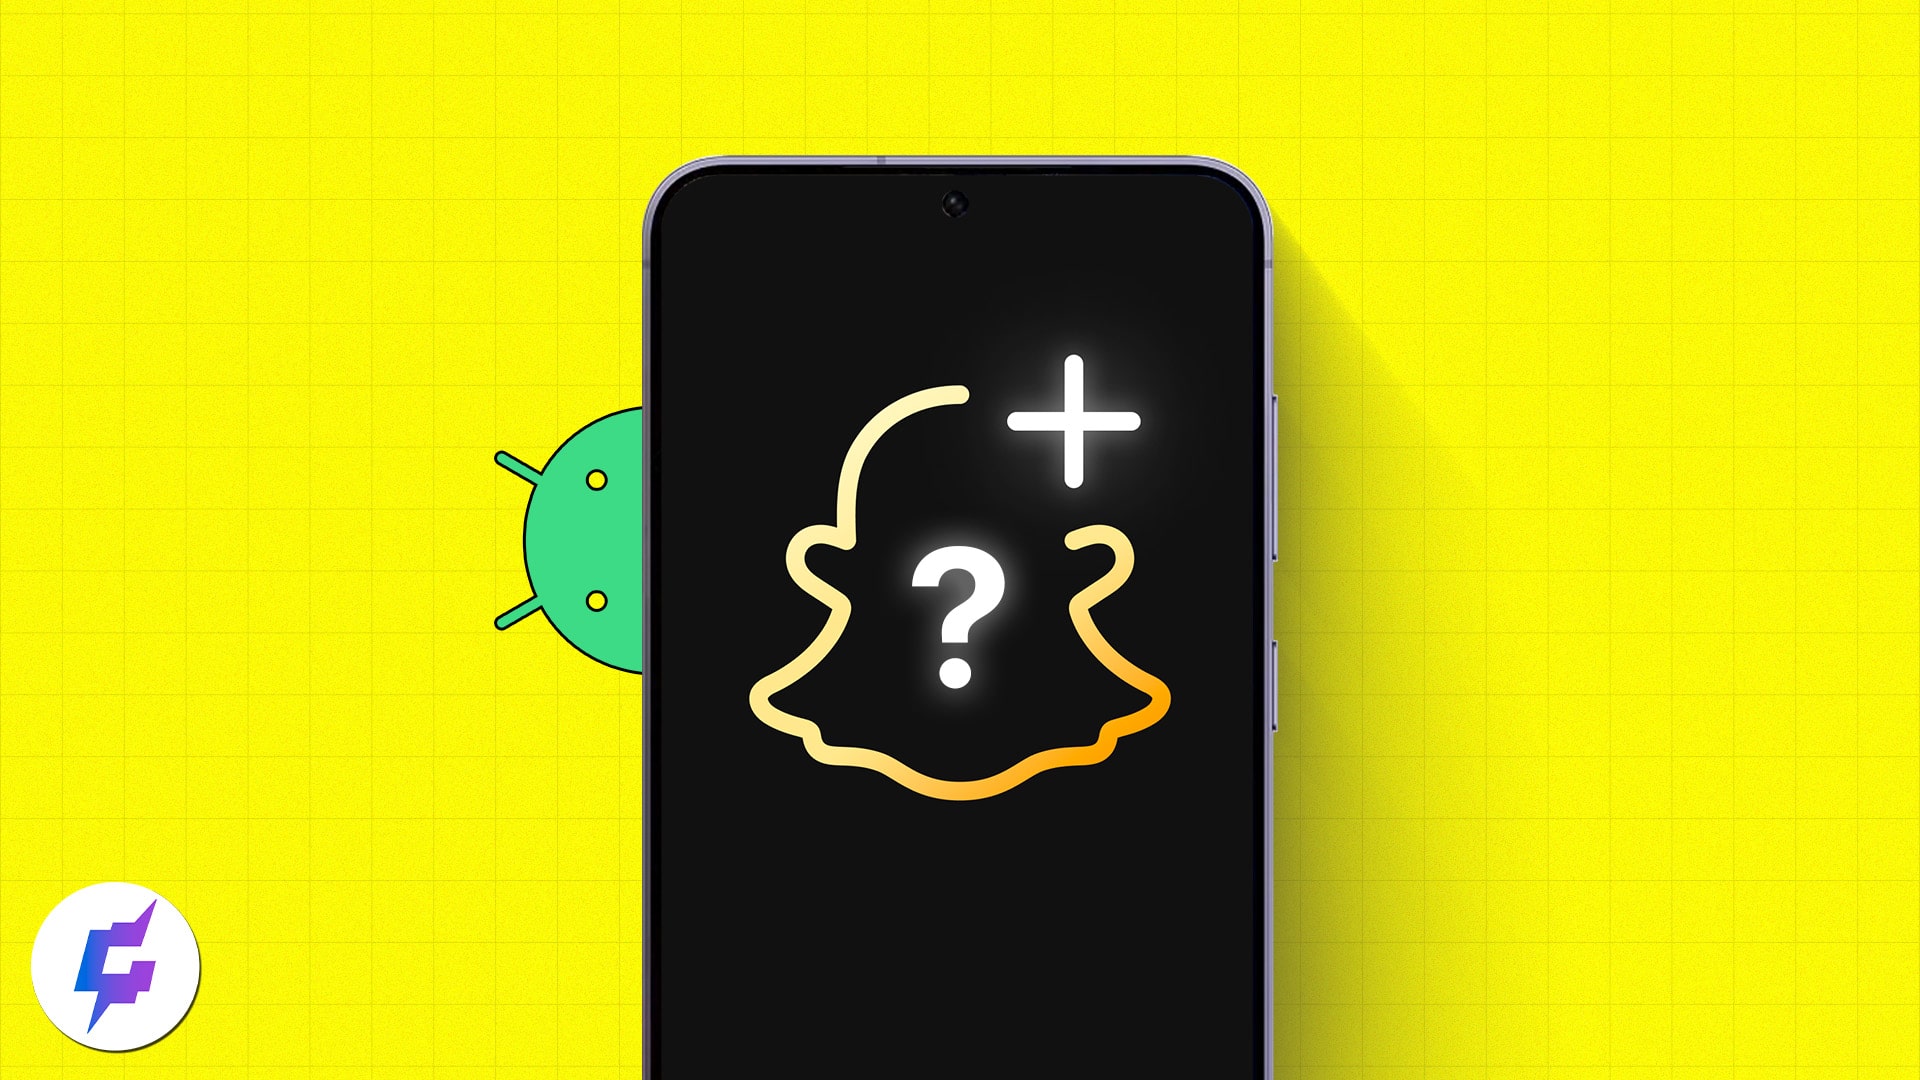 How to tell if someone has Snapchat Plus on Android